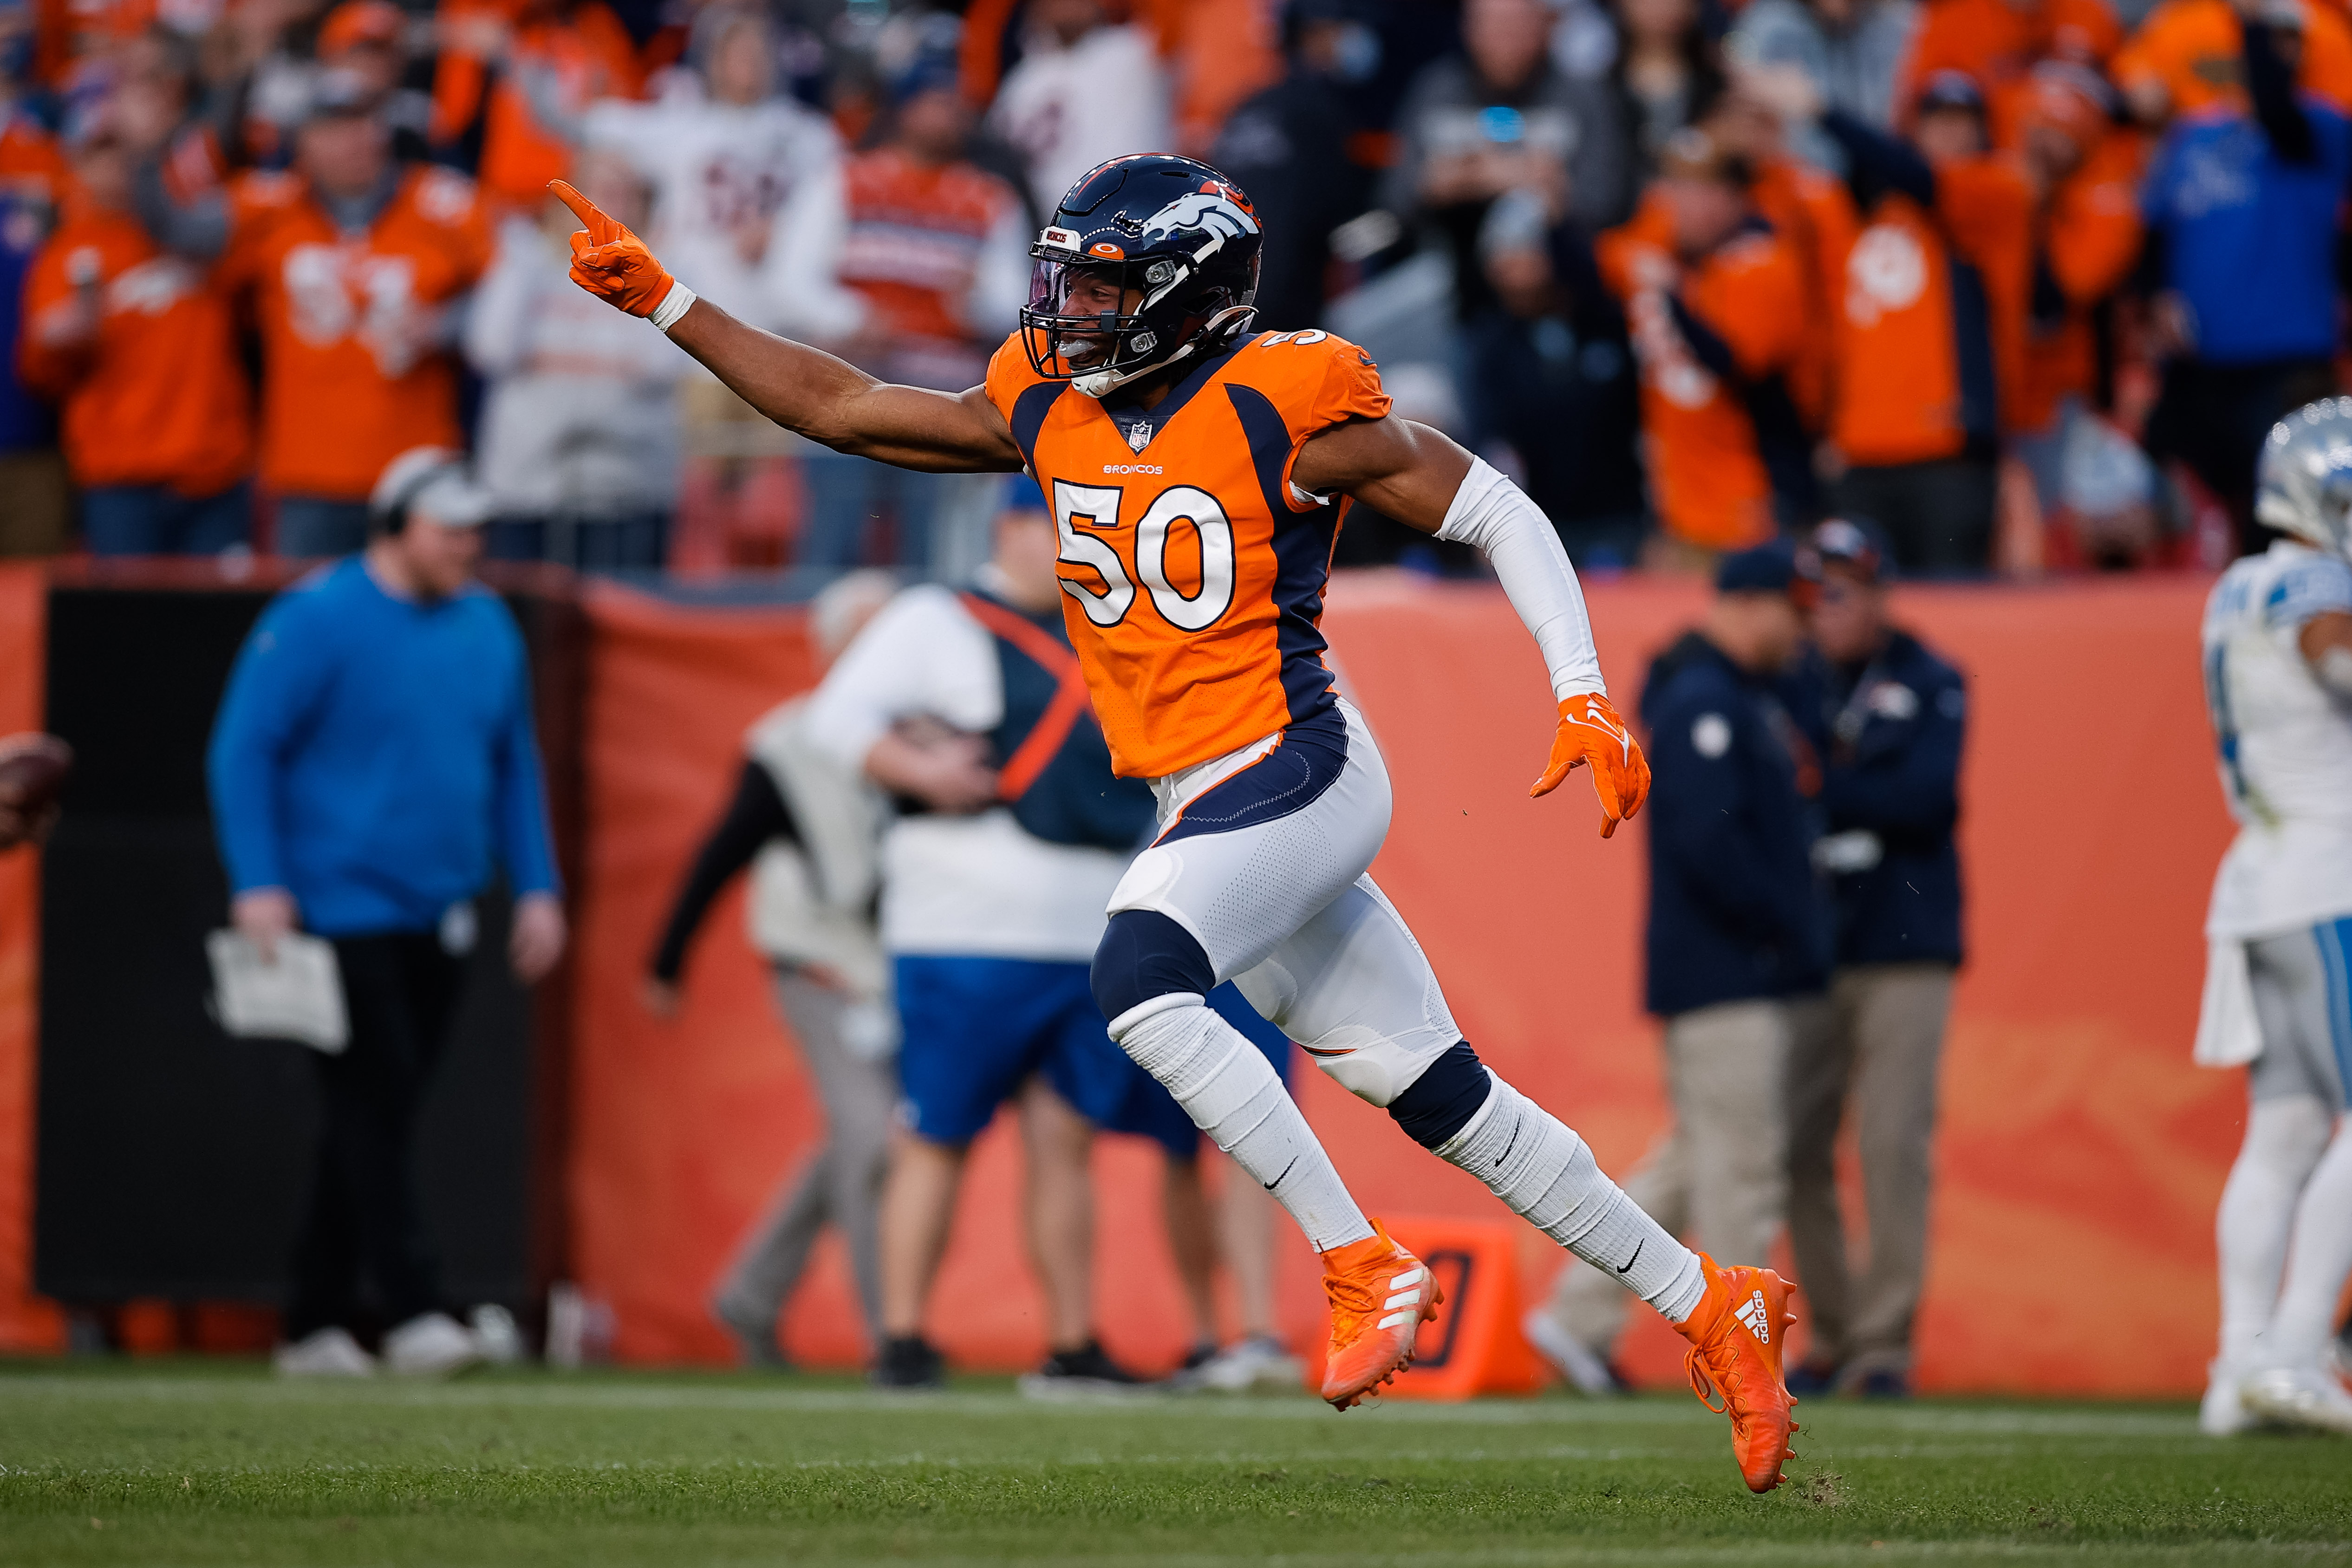 Denver Broncos linebacker Jonas Griffith (50) celebrates after a play in the fourth quarter against the Detroit Lions at Empower Field at Mile High.